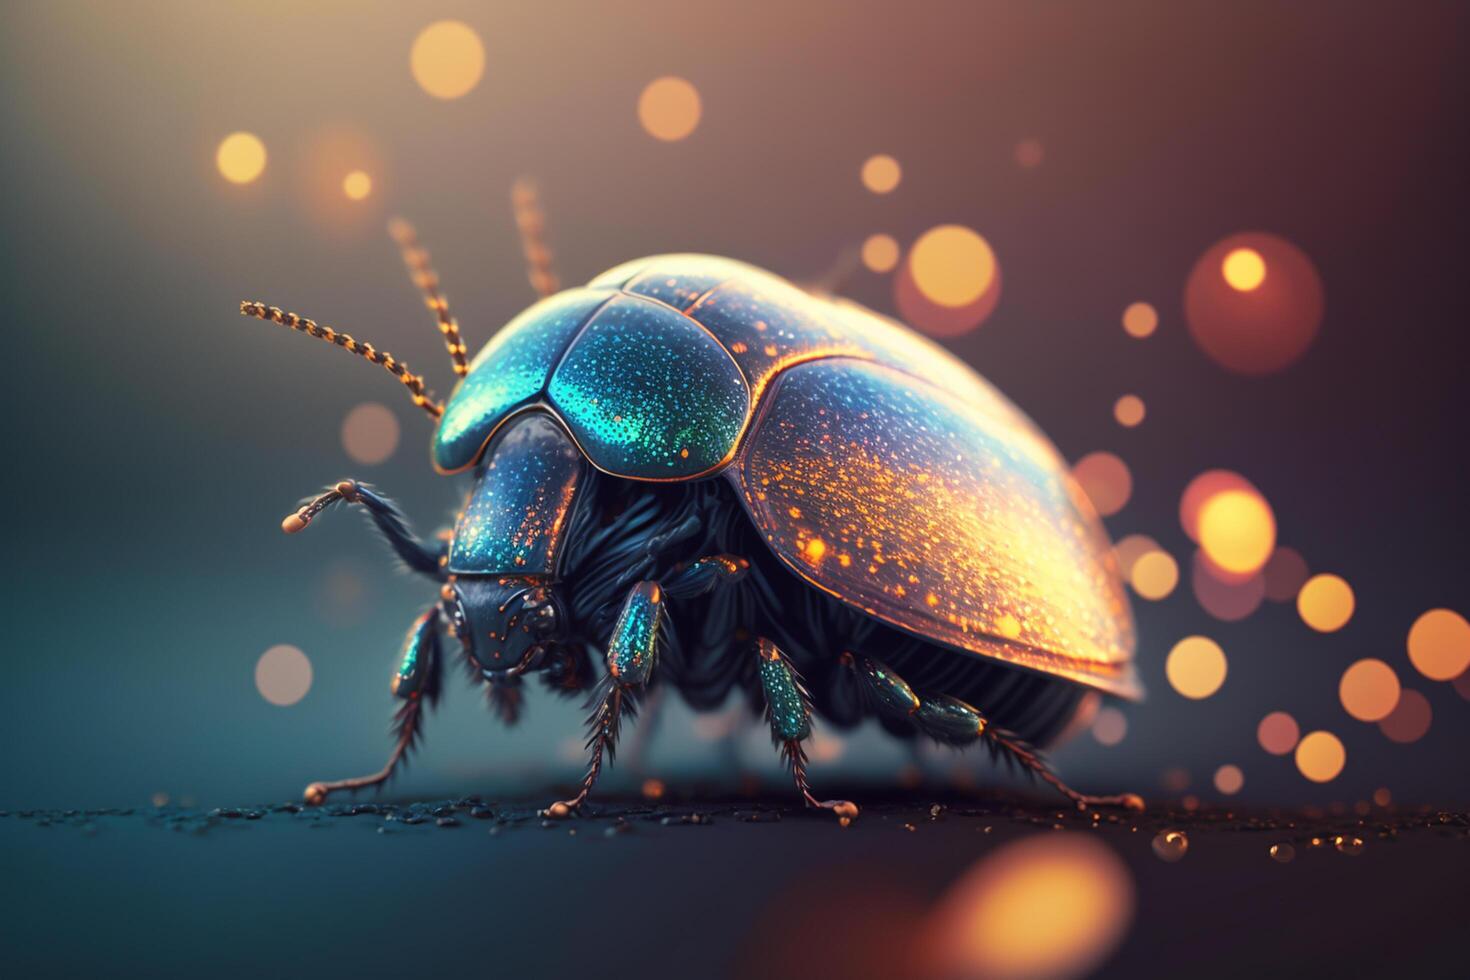 Hyperrealistic illustration of a beetle insect, close-up shot photo